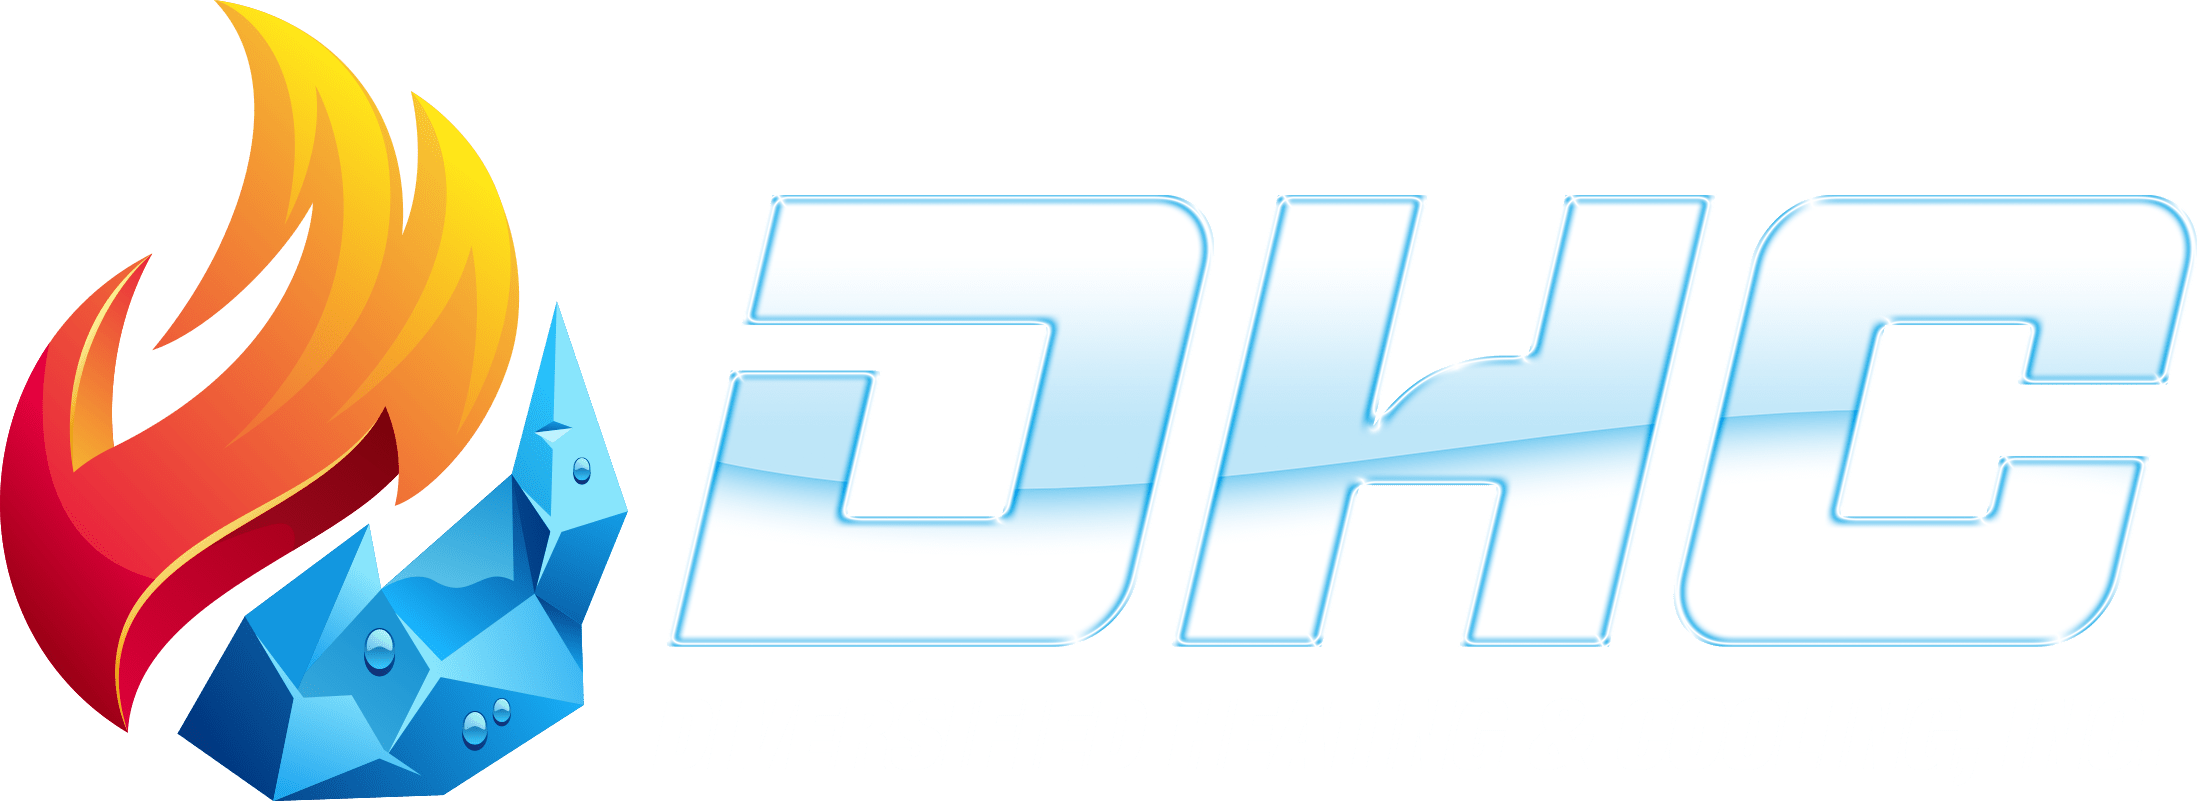 See what makes Diversified Heating & Cooling, Inc. your number one choice for Boiler repair in Troy MI.